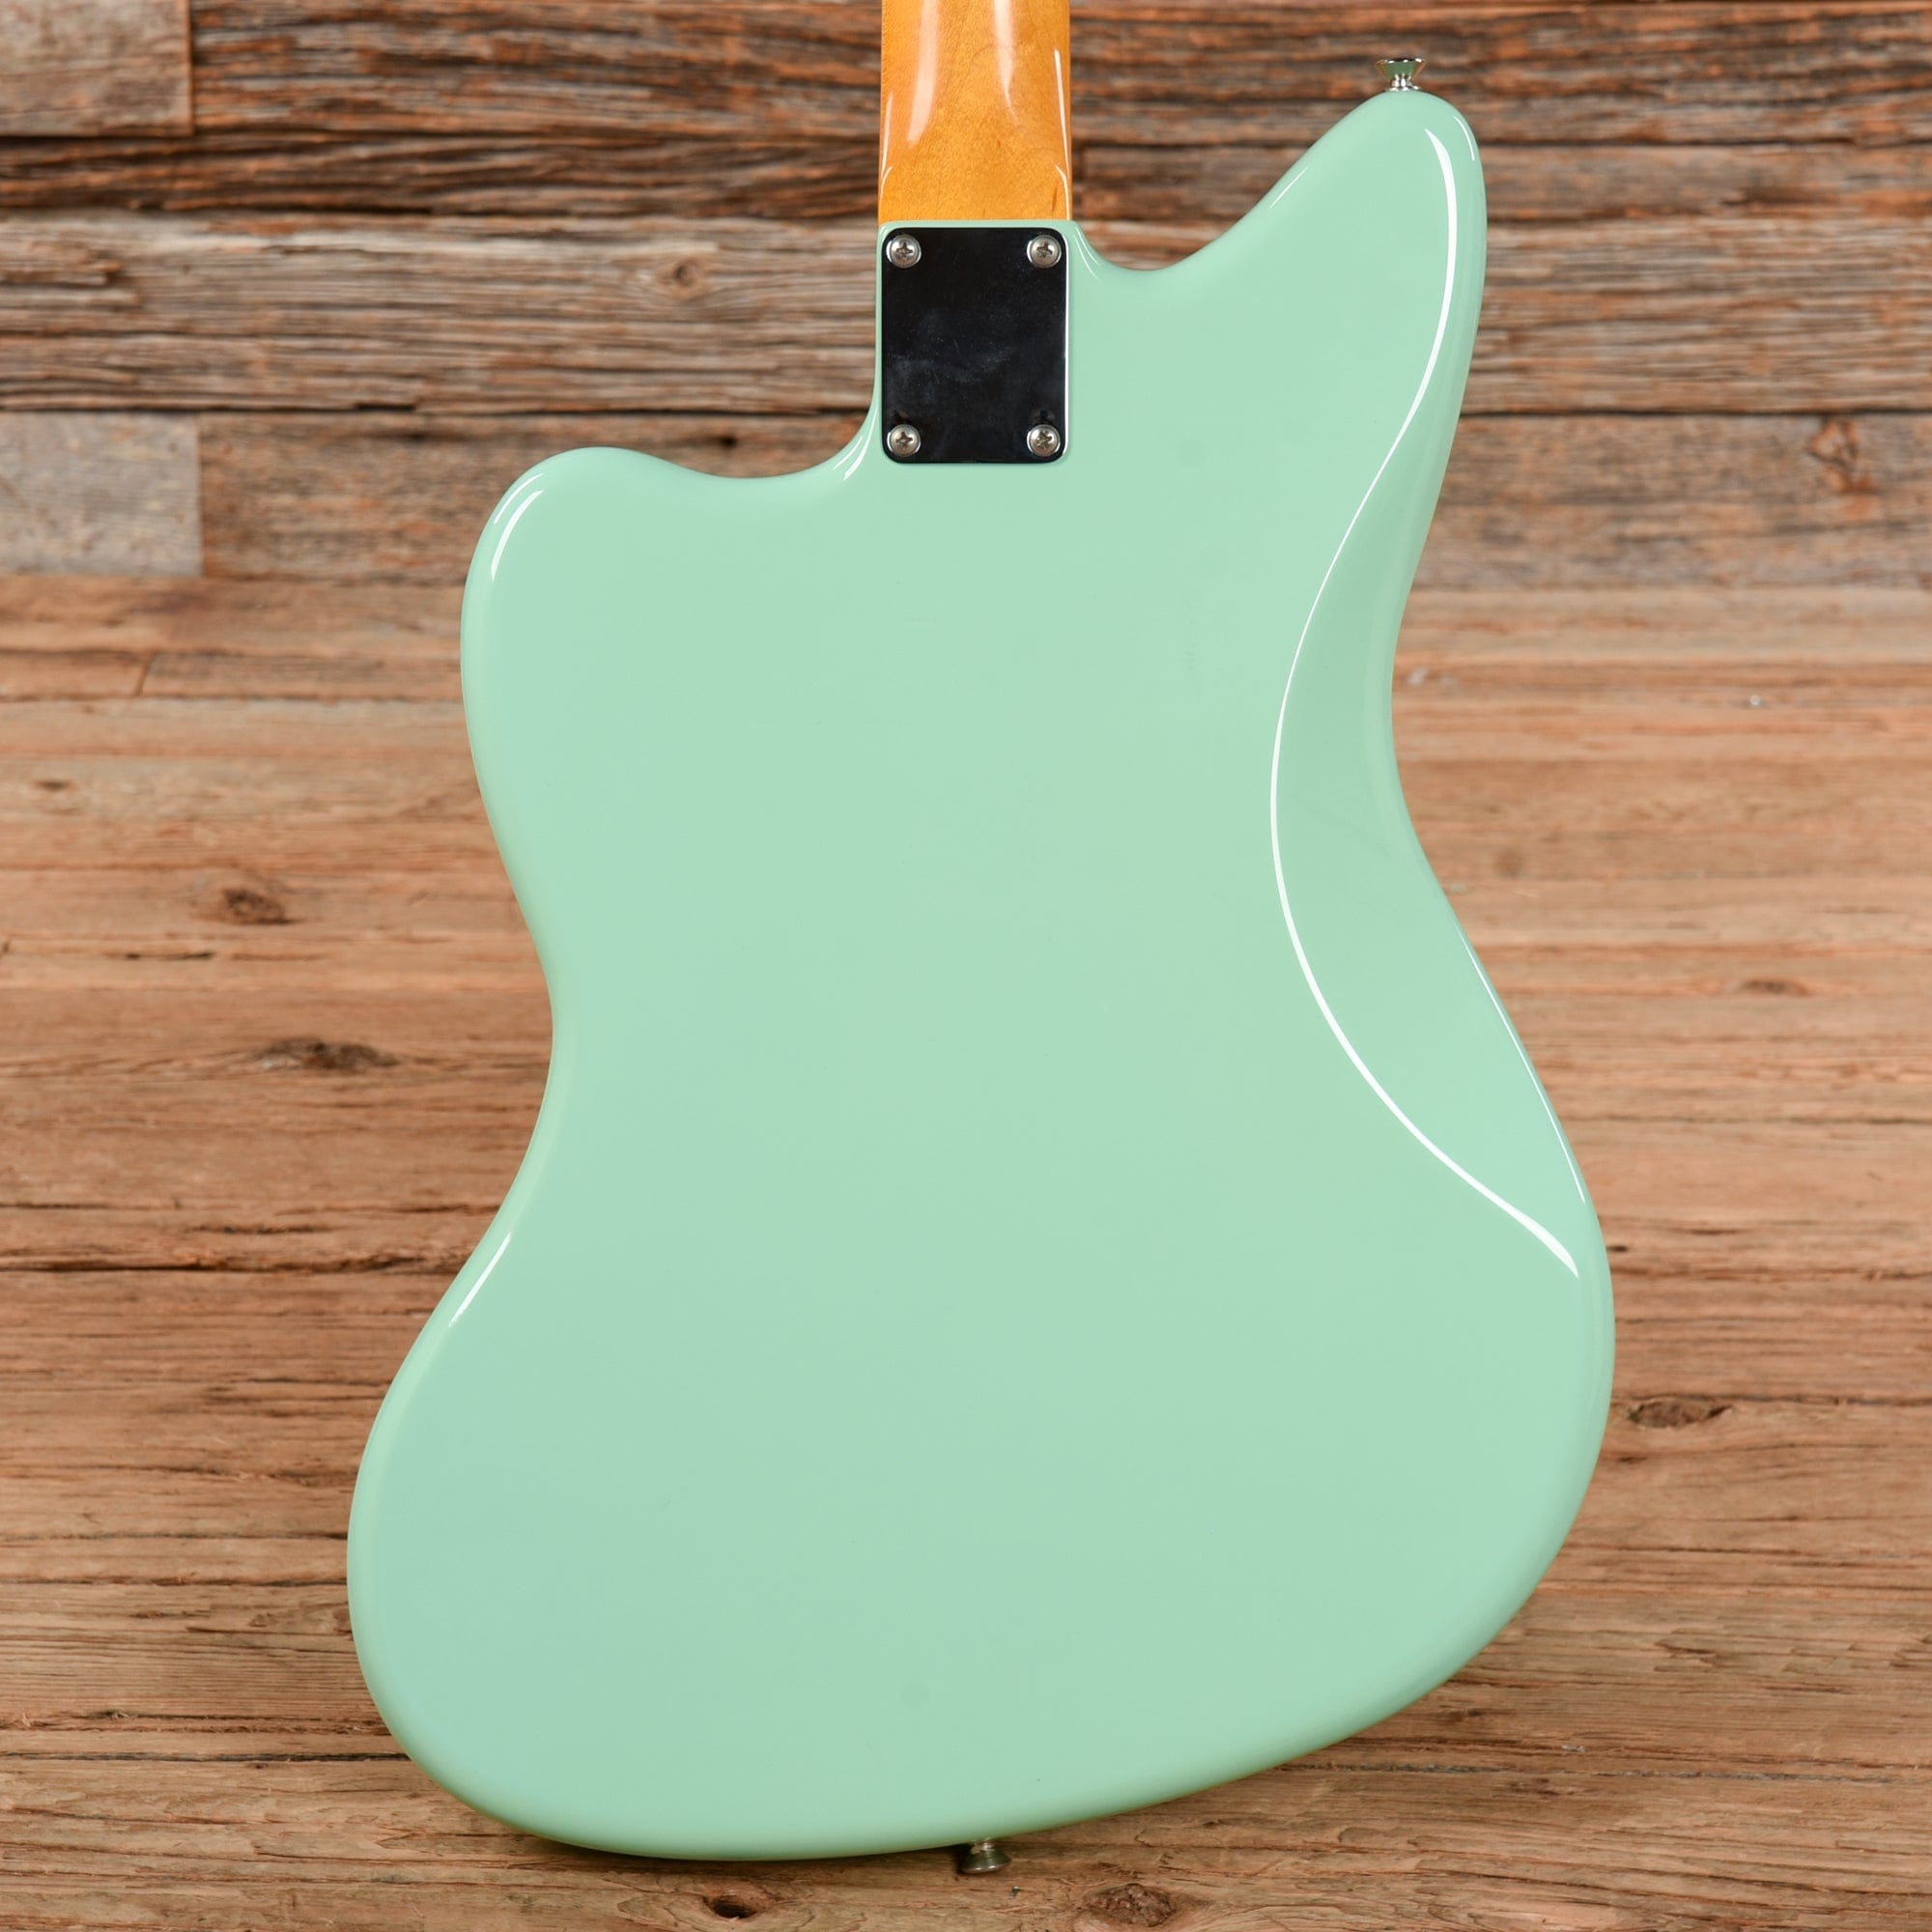 Fender Classic '60s Jazzmaster Lacquer Surf Green 2014 Electric Guitars / Solid Body